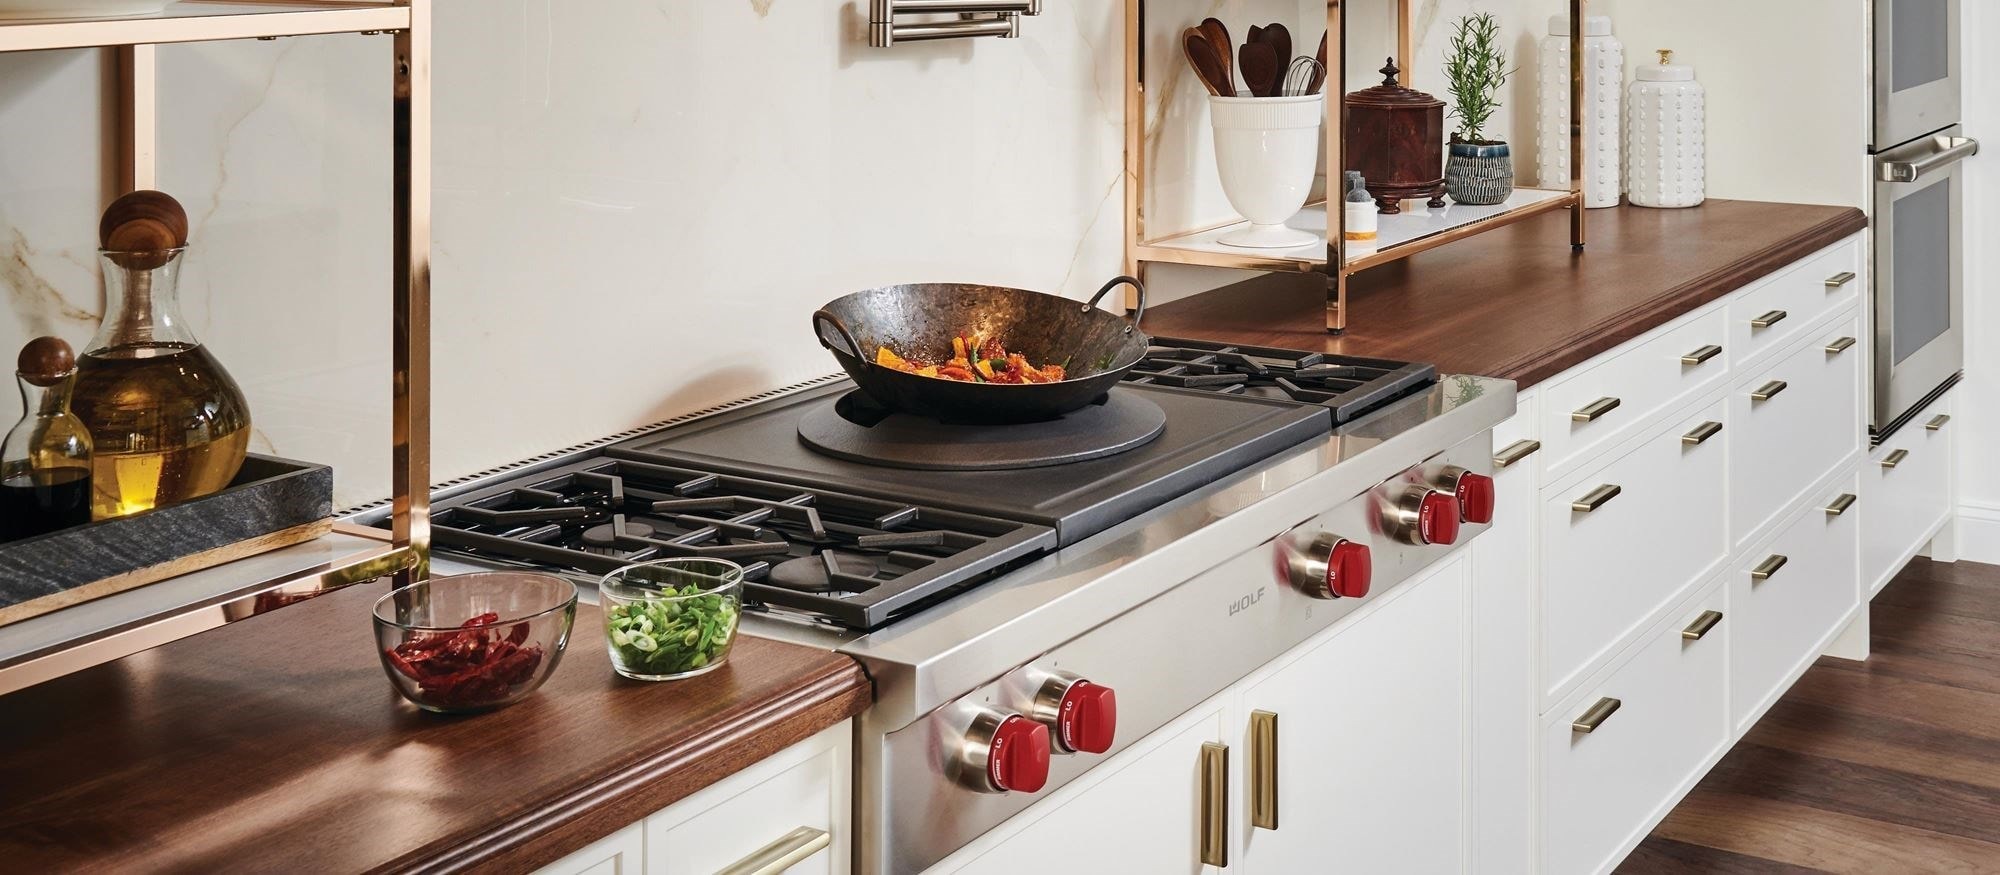 Built-In Cooking Appliances Put You in Control of Your Kitchen